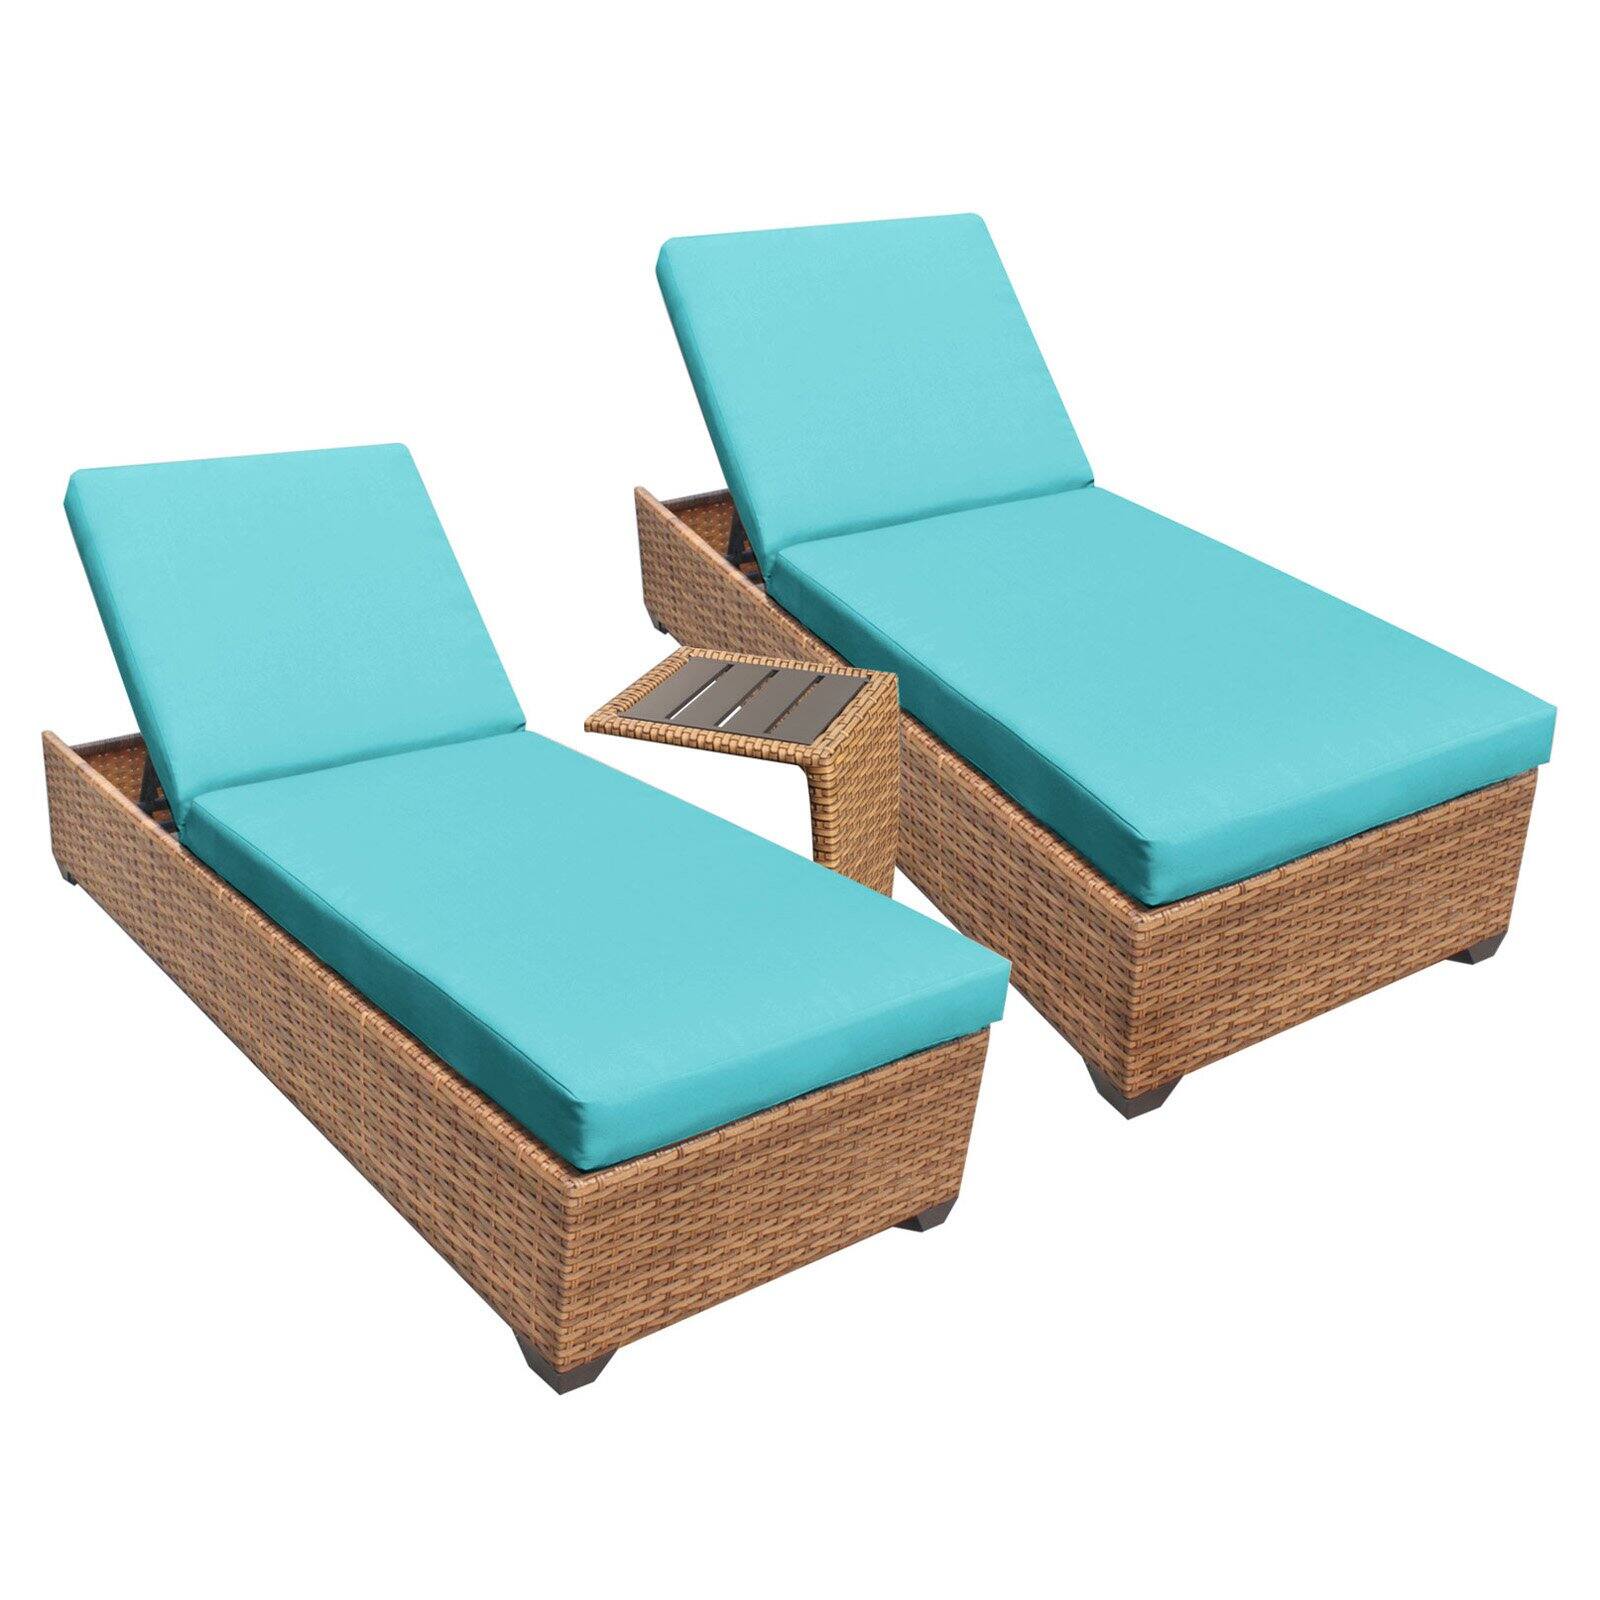 Laguna Chaise Set of 2 Outdoor Wicker Patio Furniture With Side Table - image 2 of 2